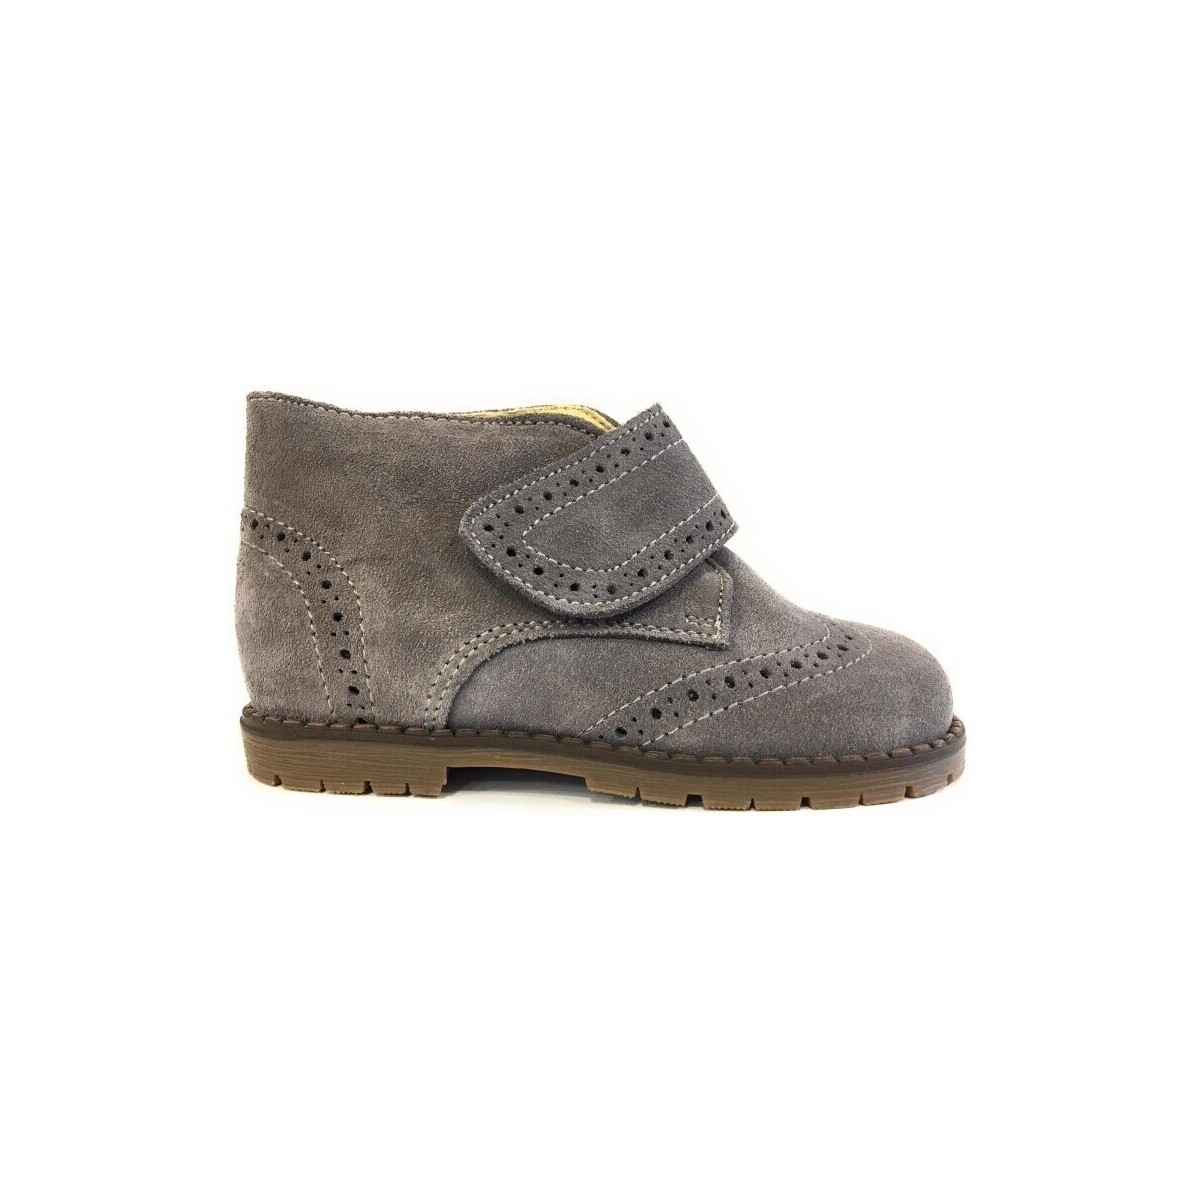 Chaussures Bottes Panyno 24135-18 Gris